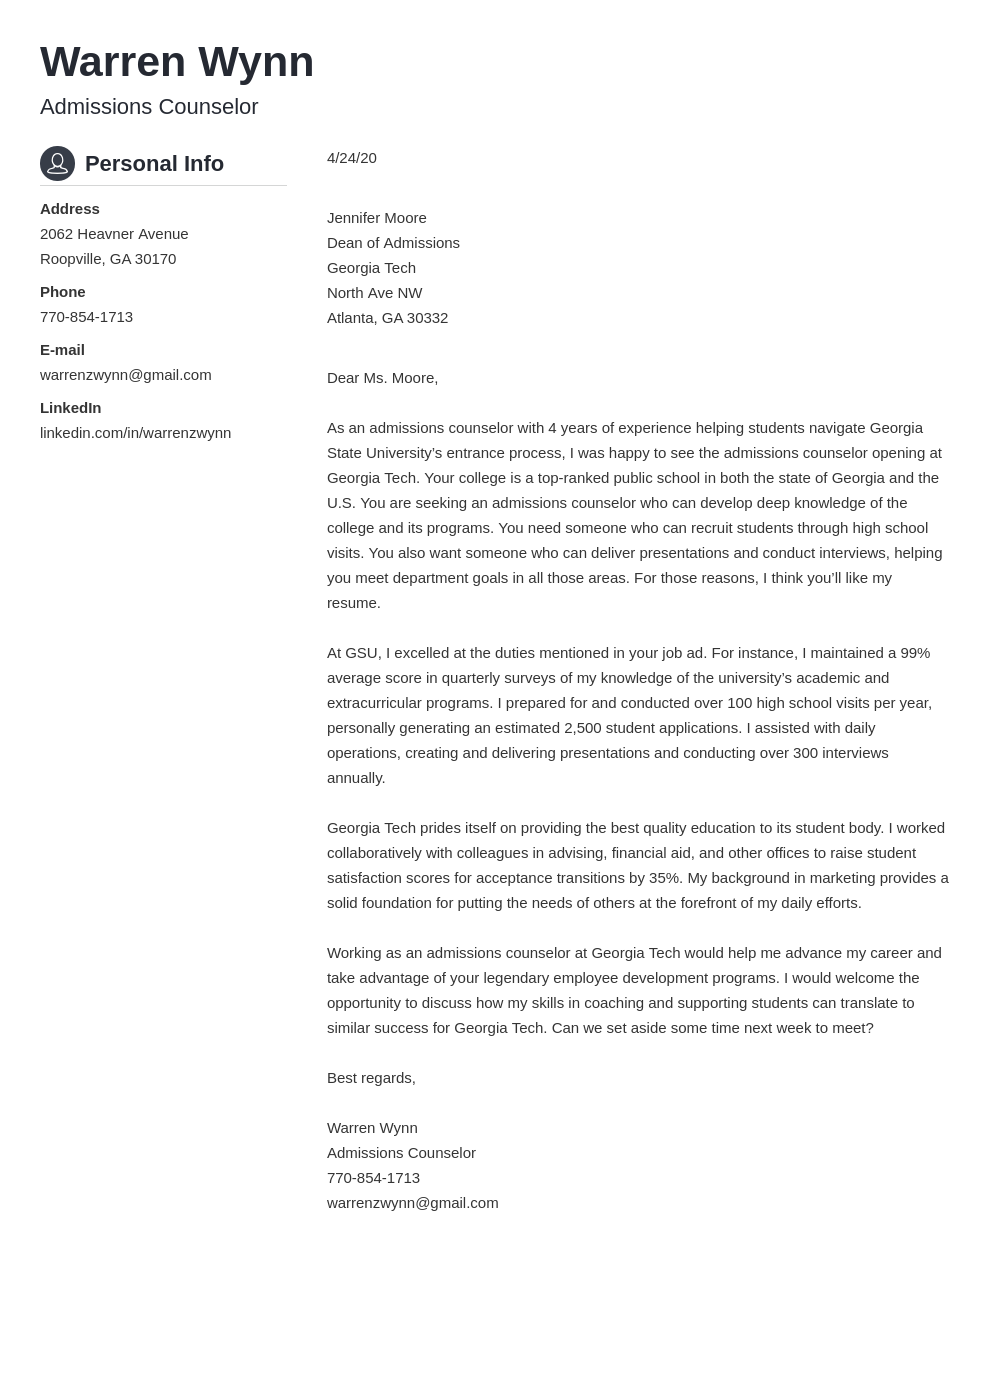 Admissions Counselor Cover Letter Examples & Writing Guide